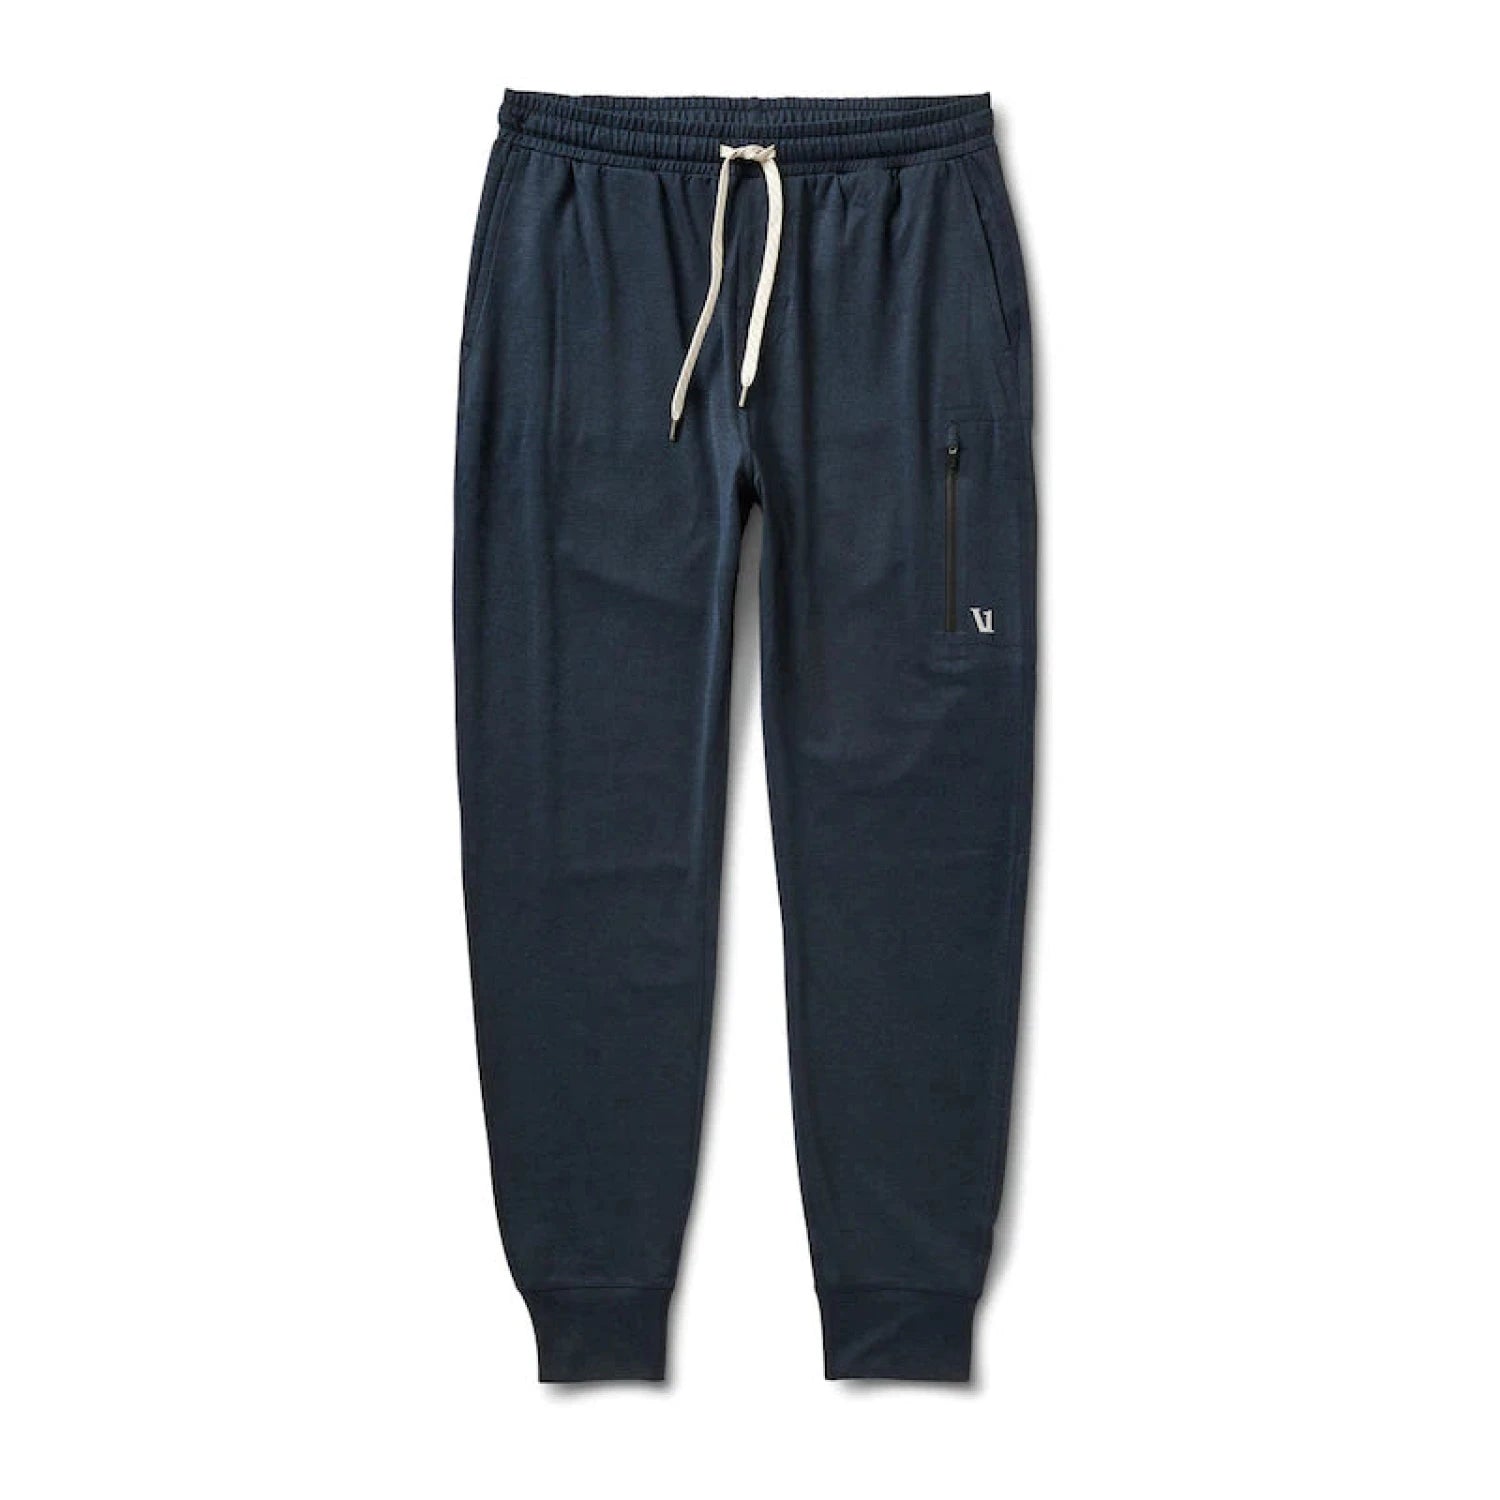 Vuori Men's Sunday Performance Joggers shown in the Ink Heather color option. Front view.